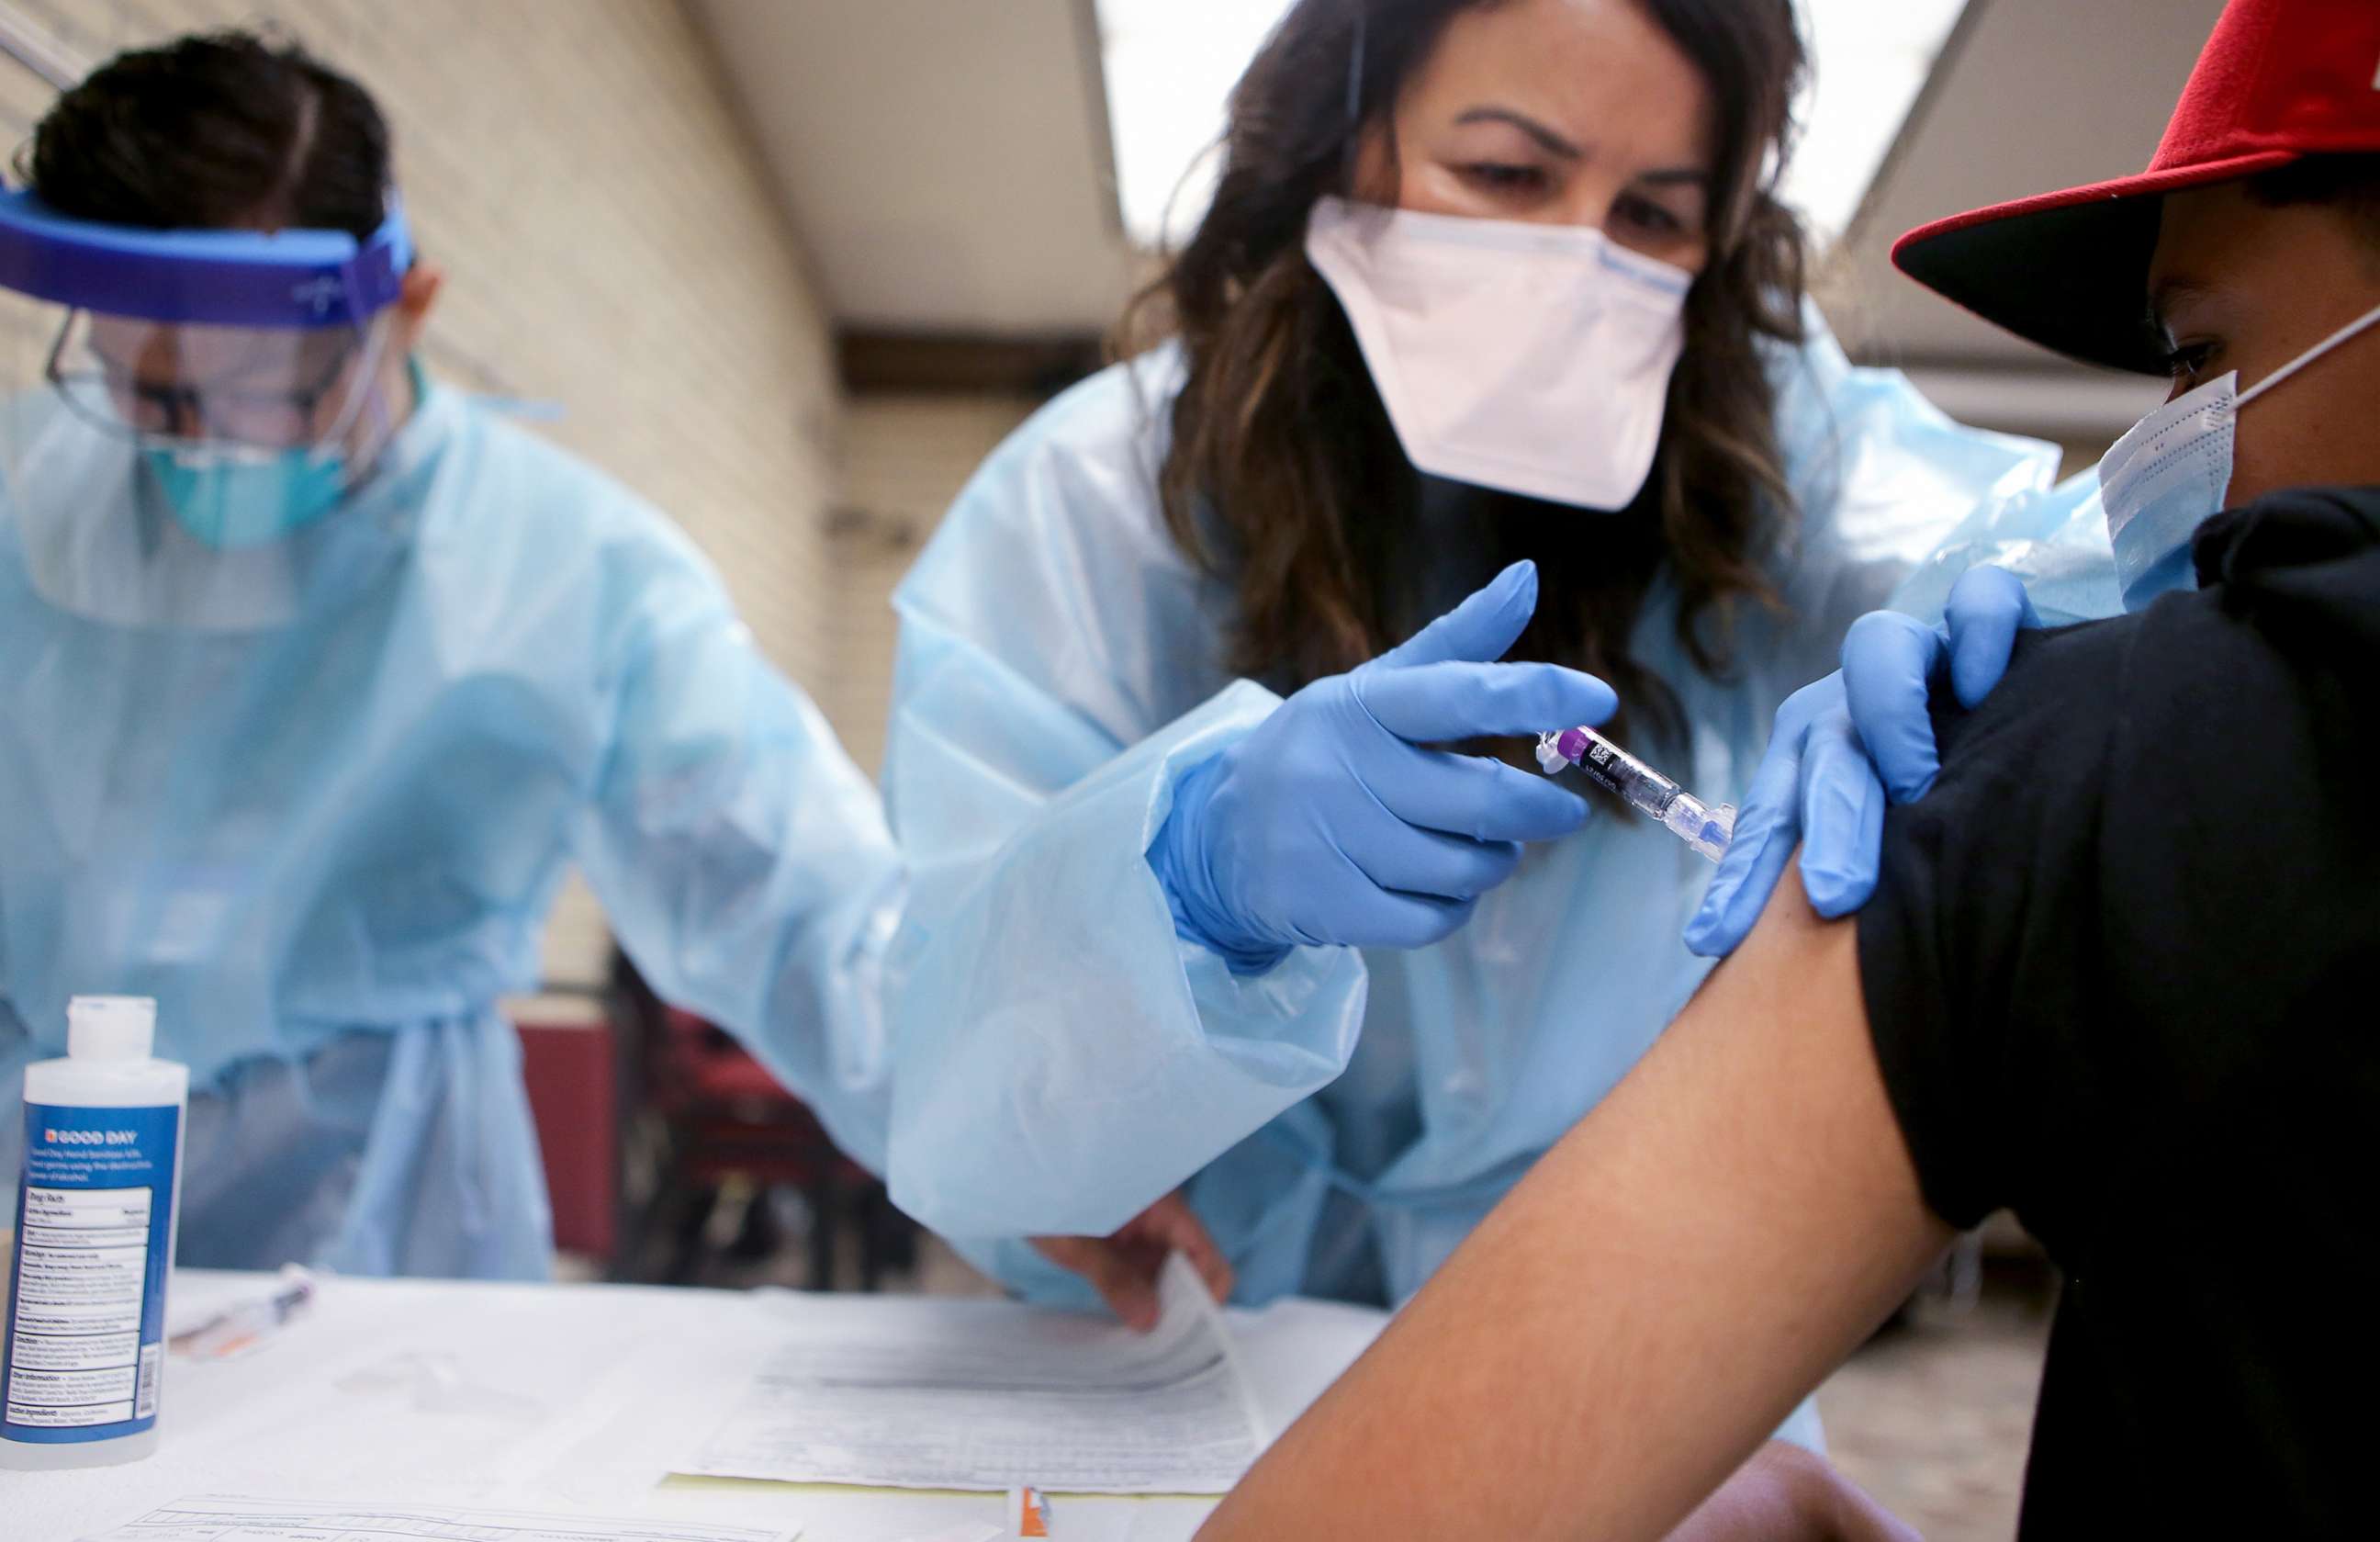 PHOTO: In this Oct. 14, 2020, file photo, a nurse gives a flu vaccination shot to a young man at a free clinic held at a local library in Lakewood, Calif.